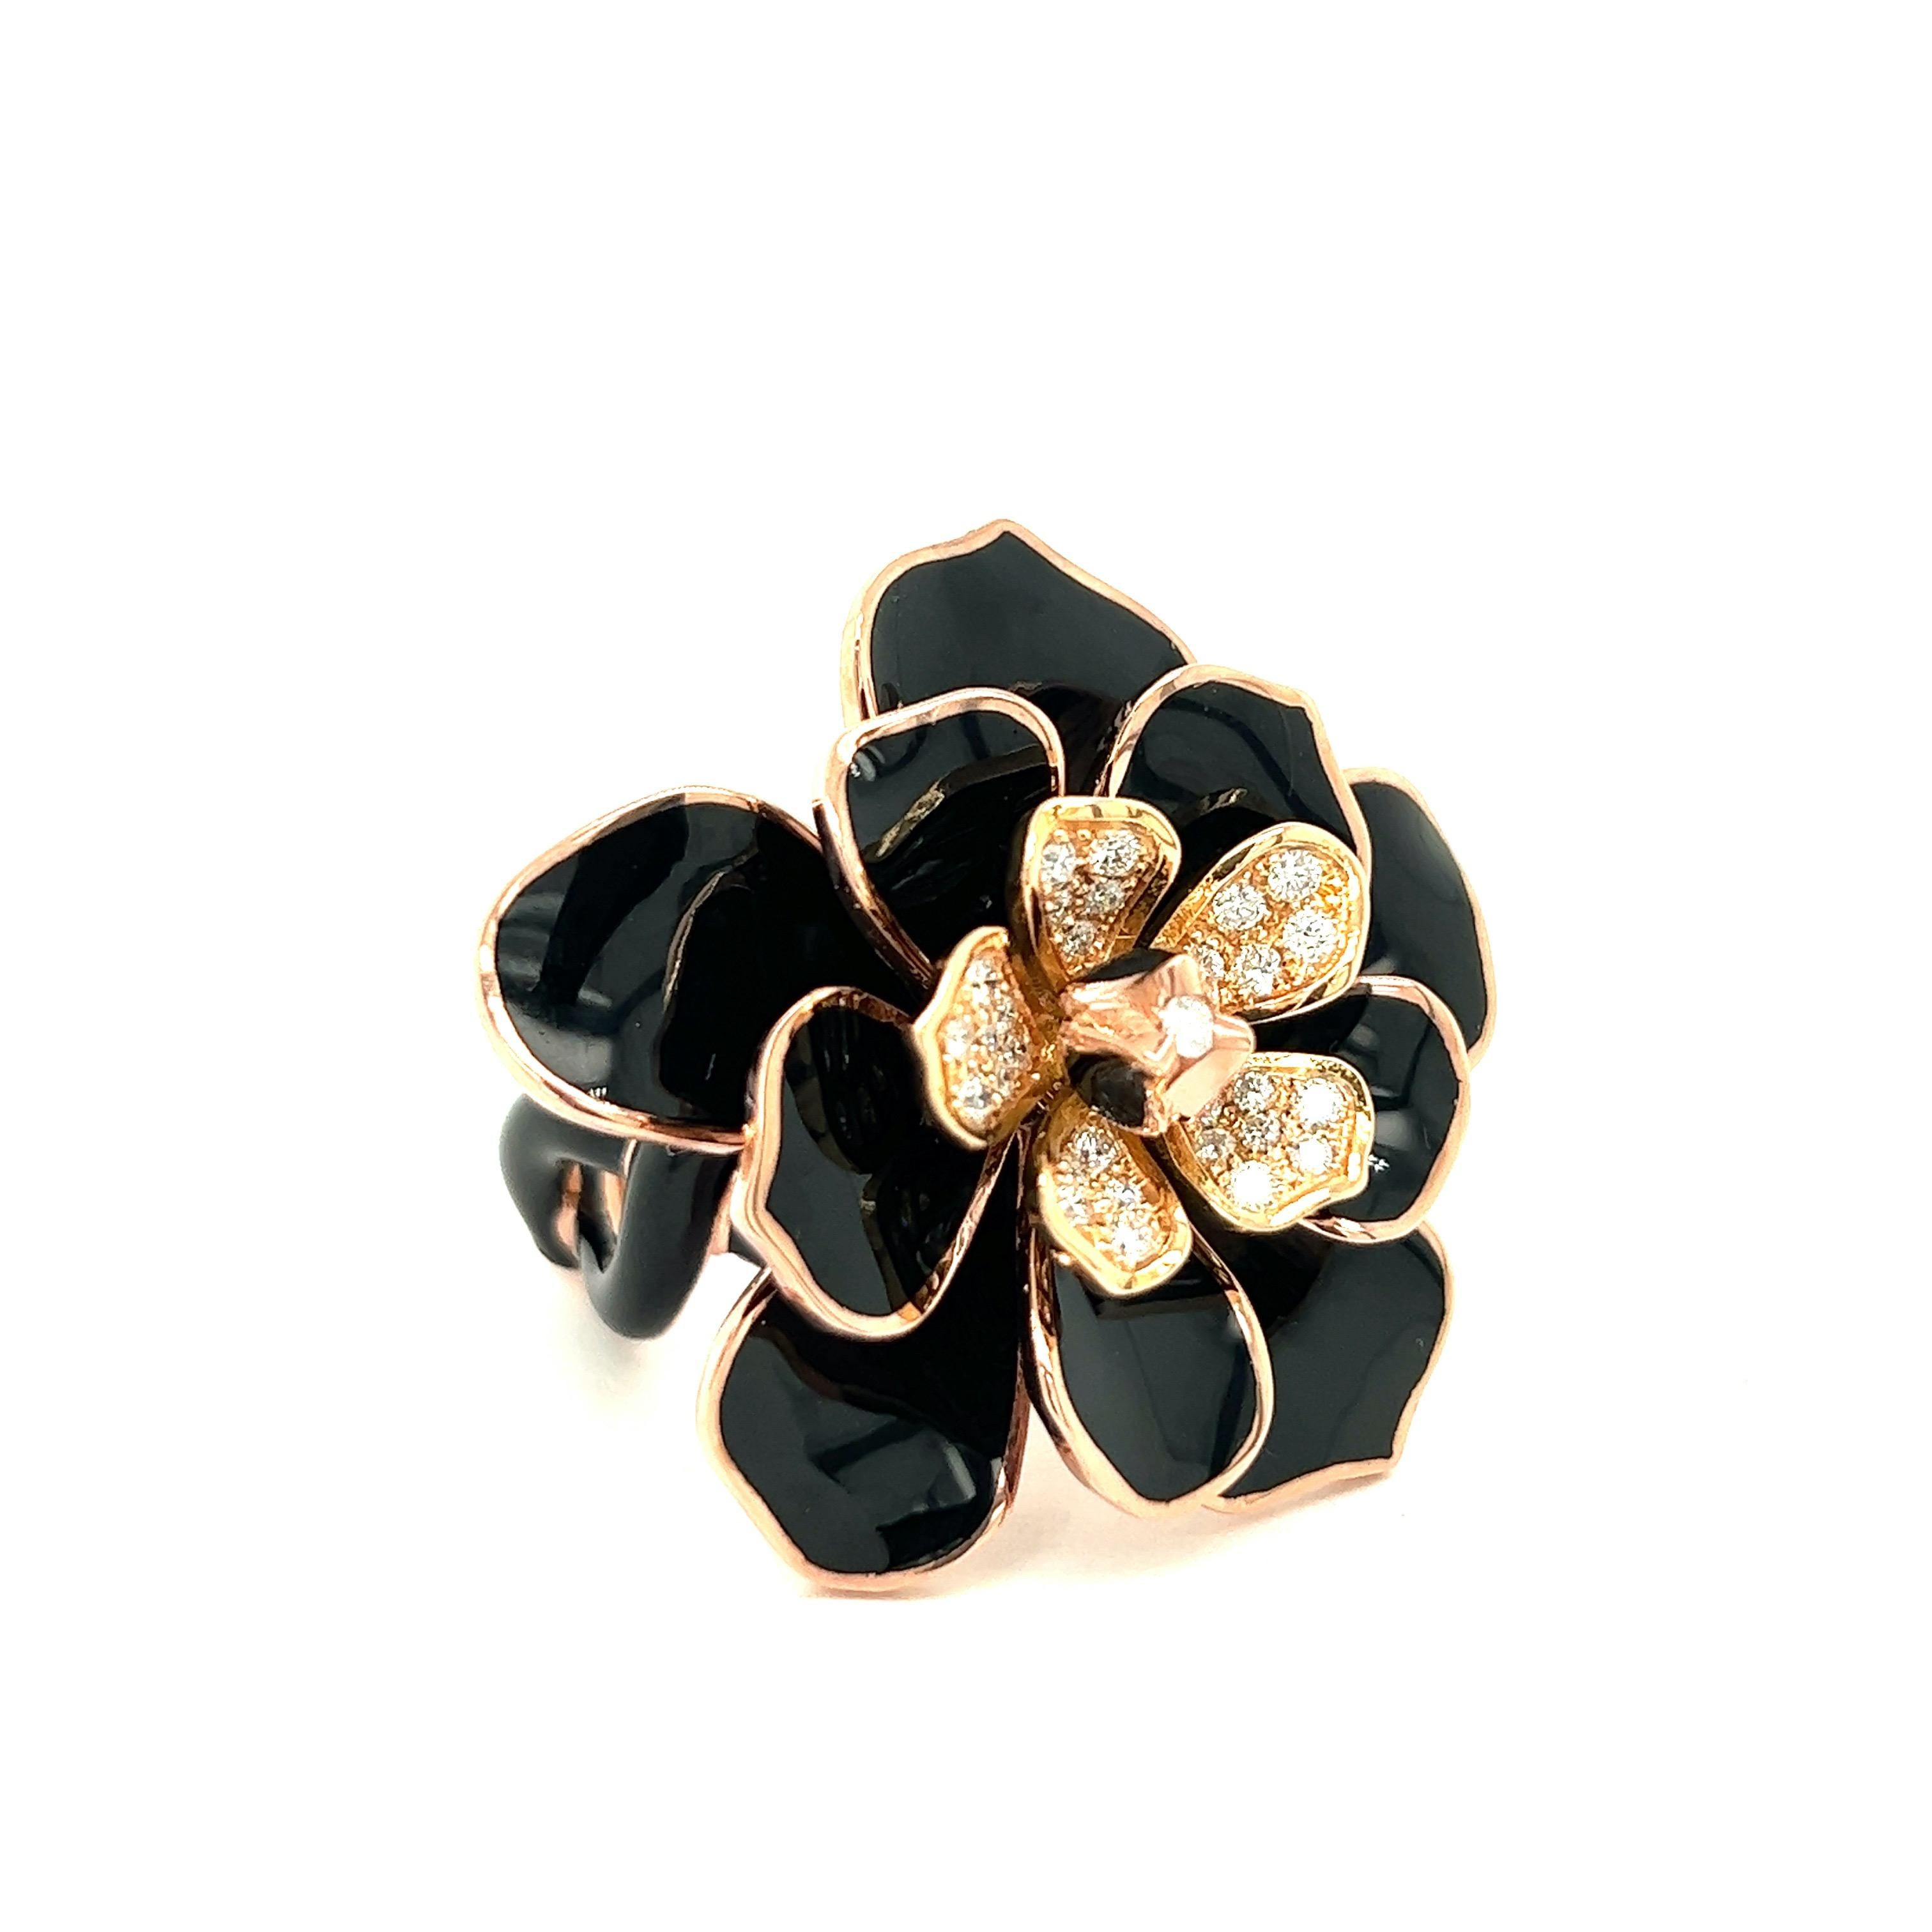 Alexis NY Black Enamel Flower Ring

Small round-cut diamonds of 1 carat, black enamel, set on 18 karat rose gold and sterling silver; marked Alexis NY, 750, 925

Size: 7.5 US; top width 3.5 cm
Total weight: 22.5 grams